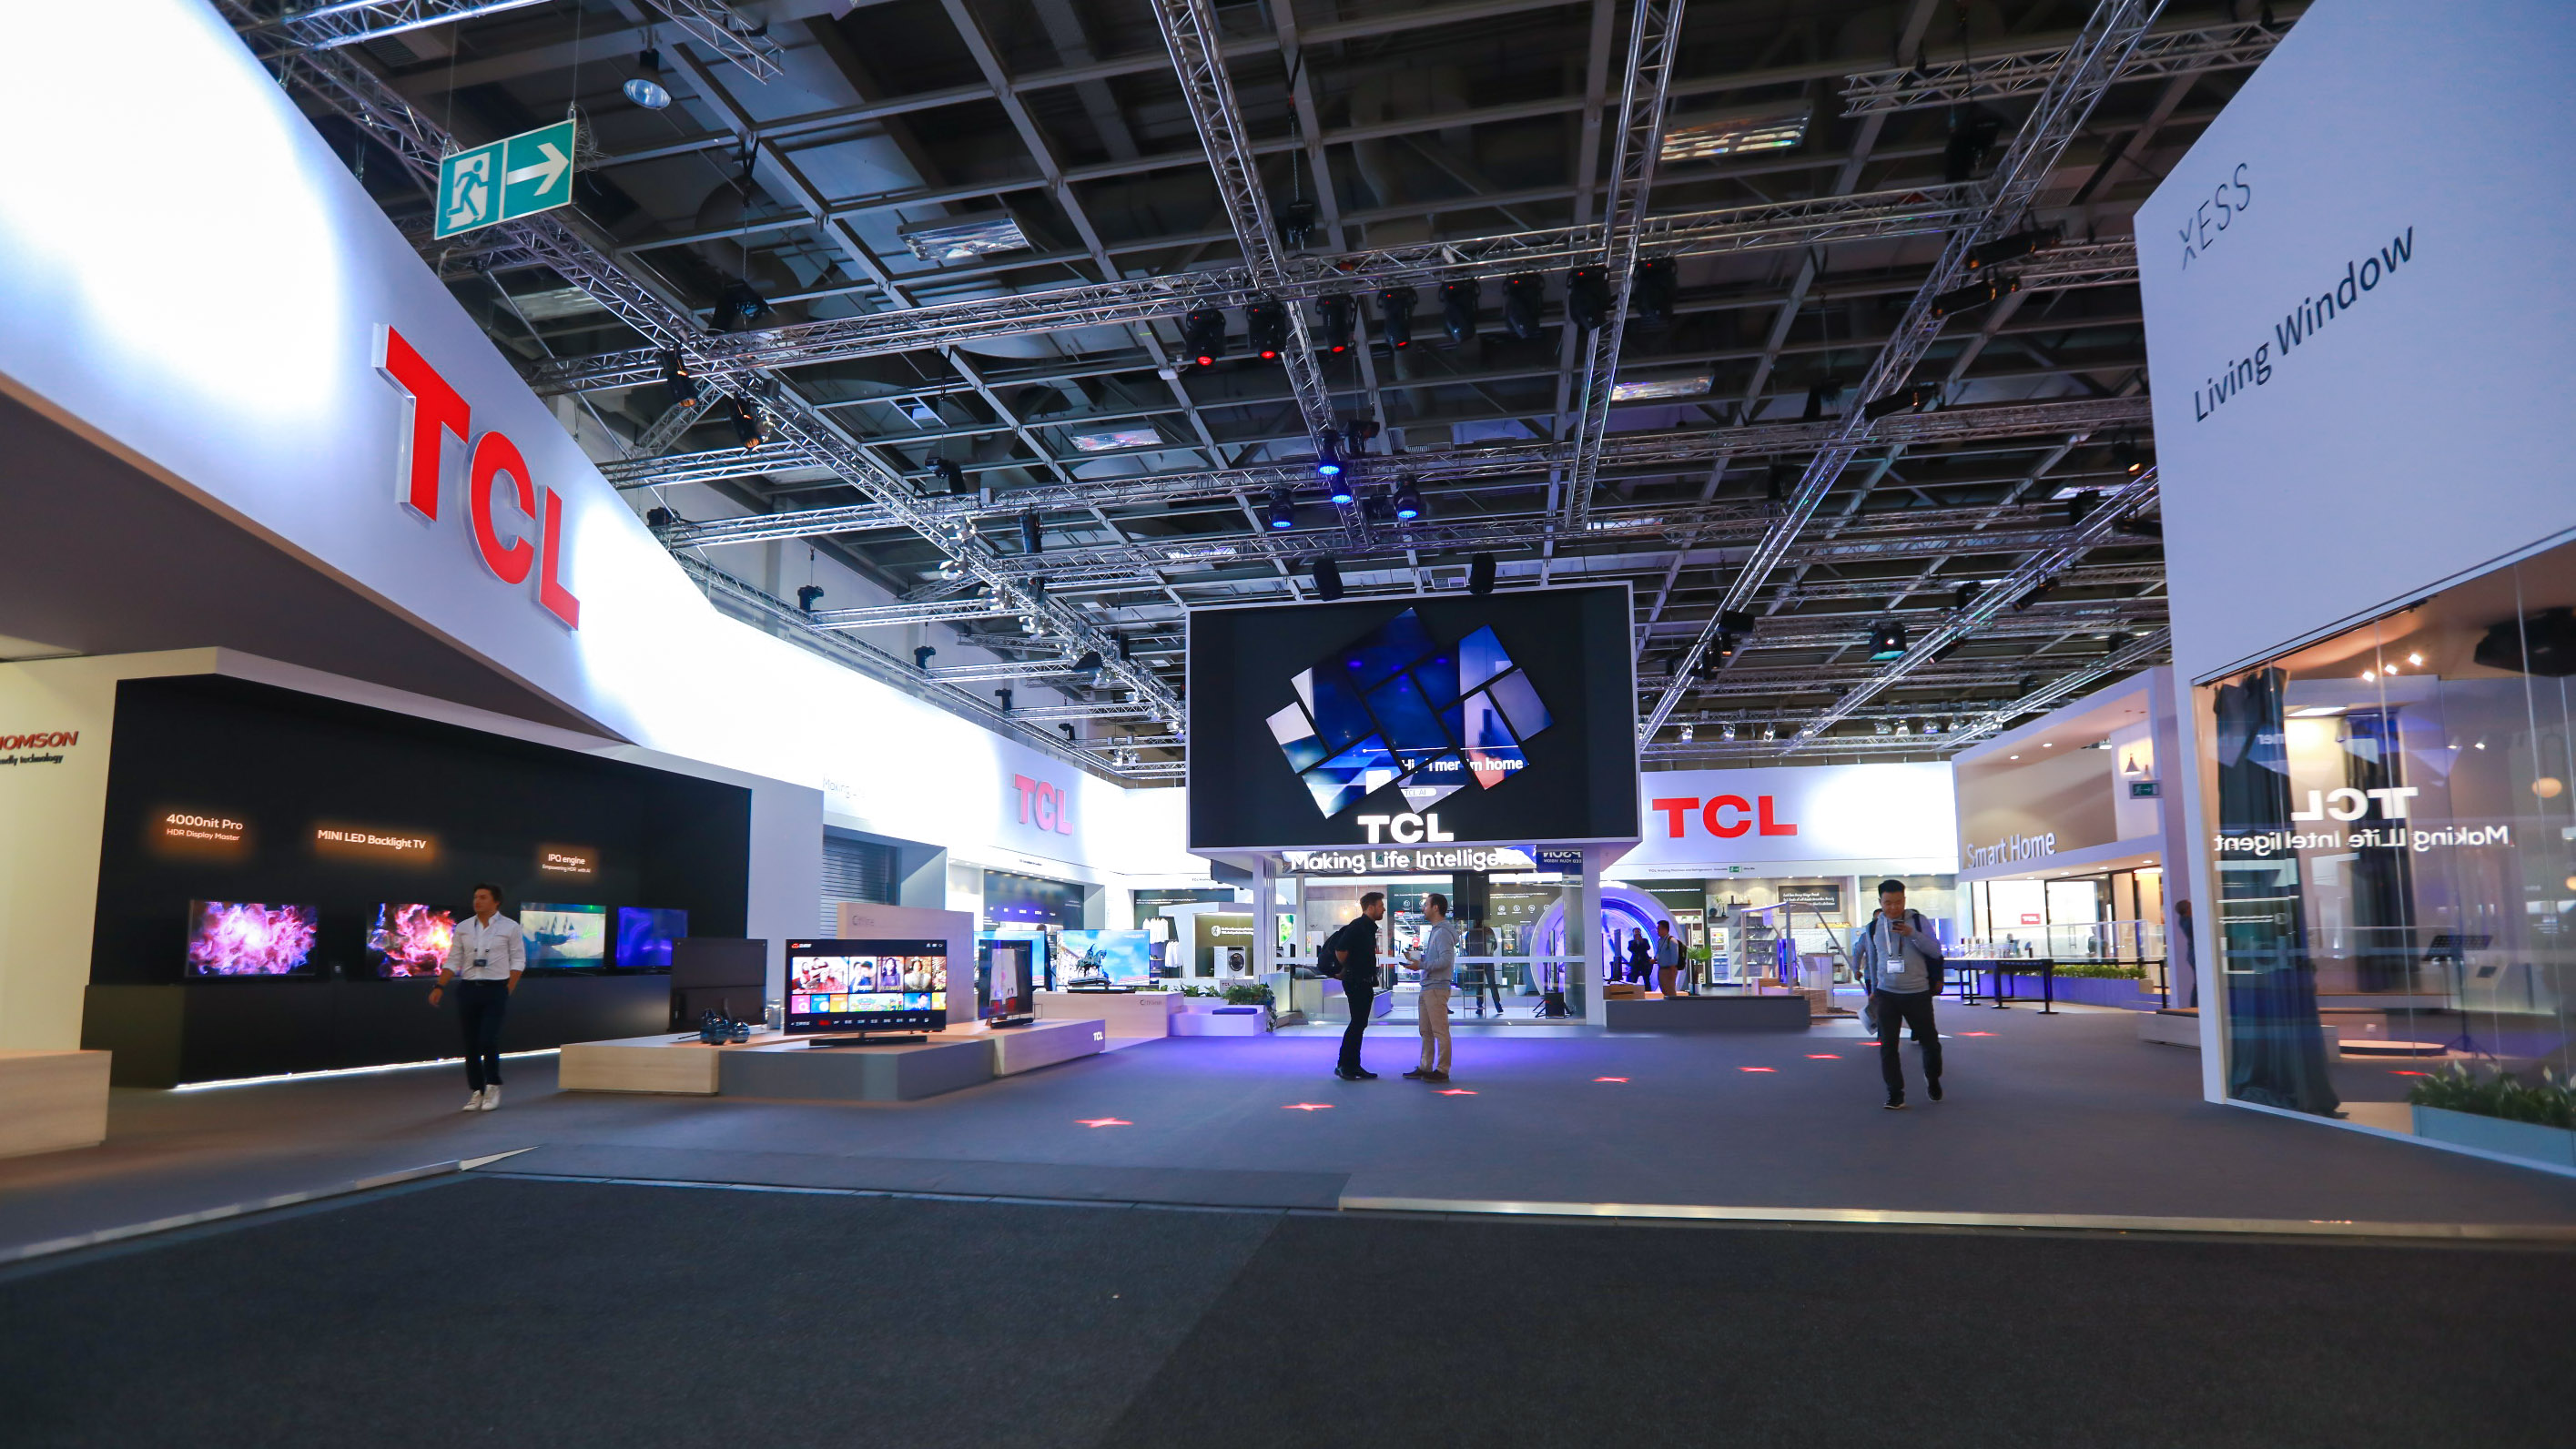 TCL Unveils Expended Range of Al-Enabled TV Products at IFA 2018